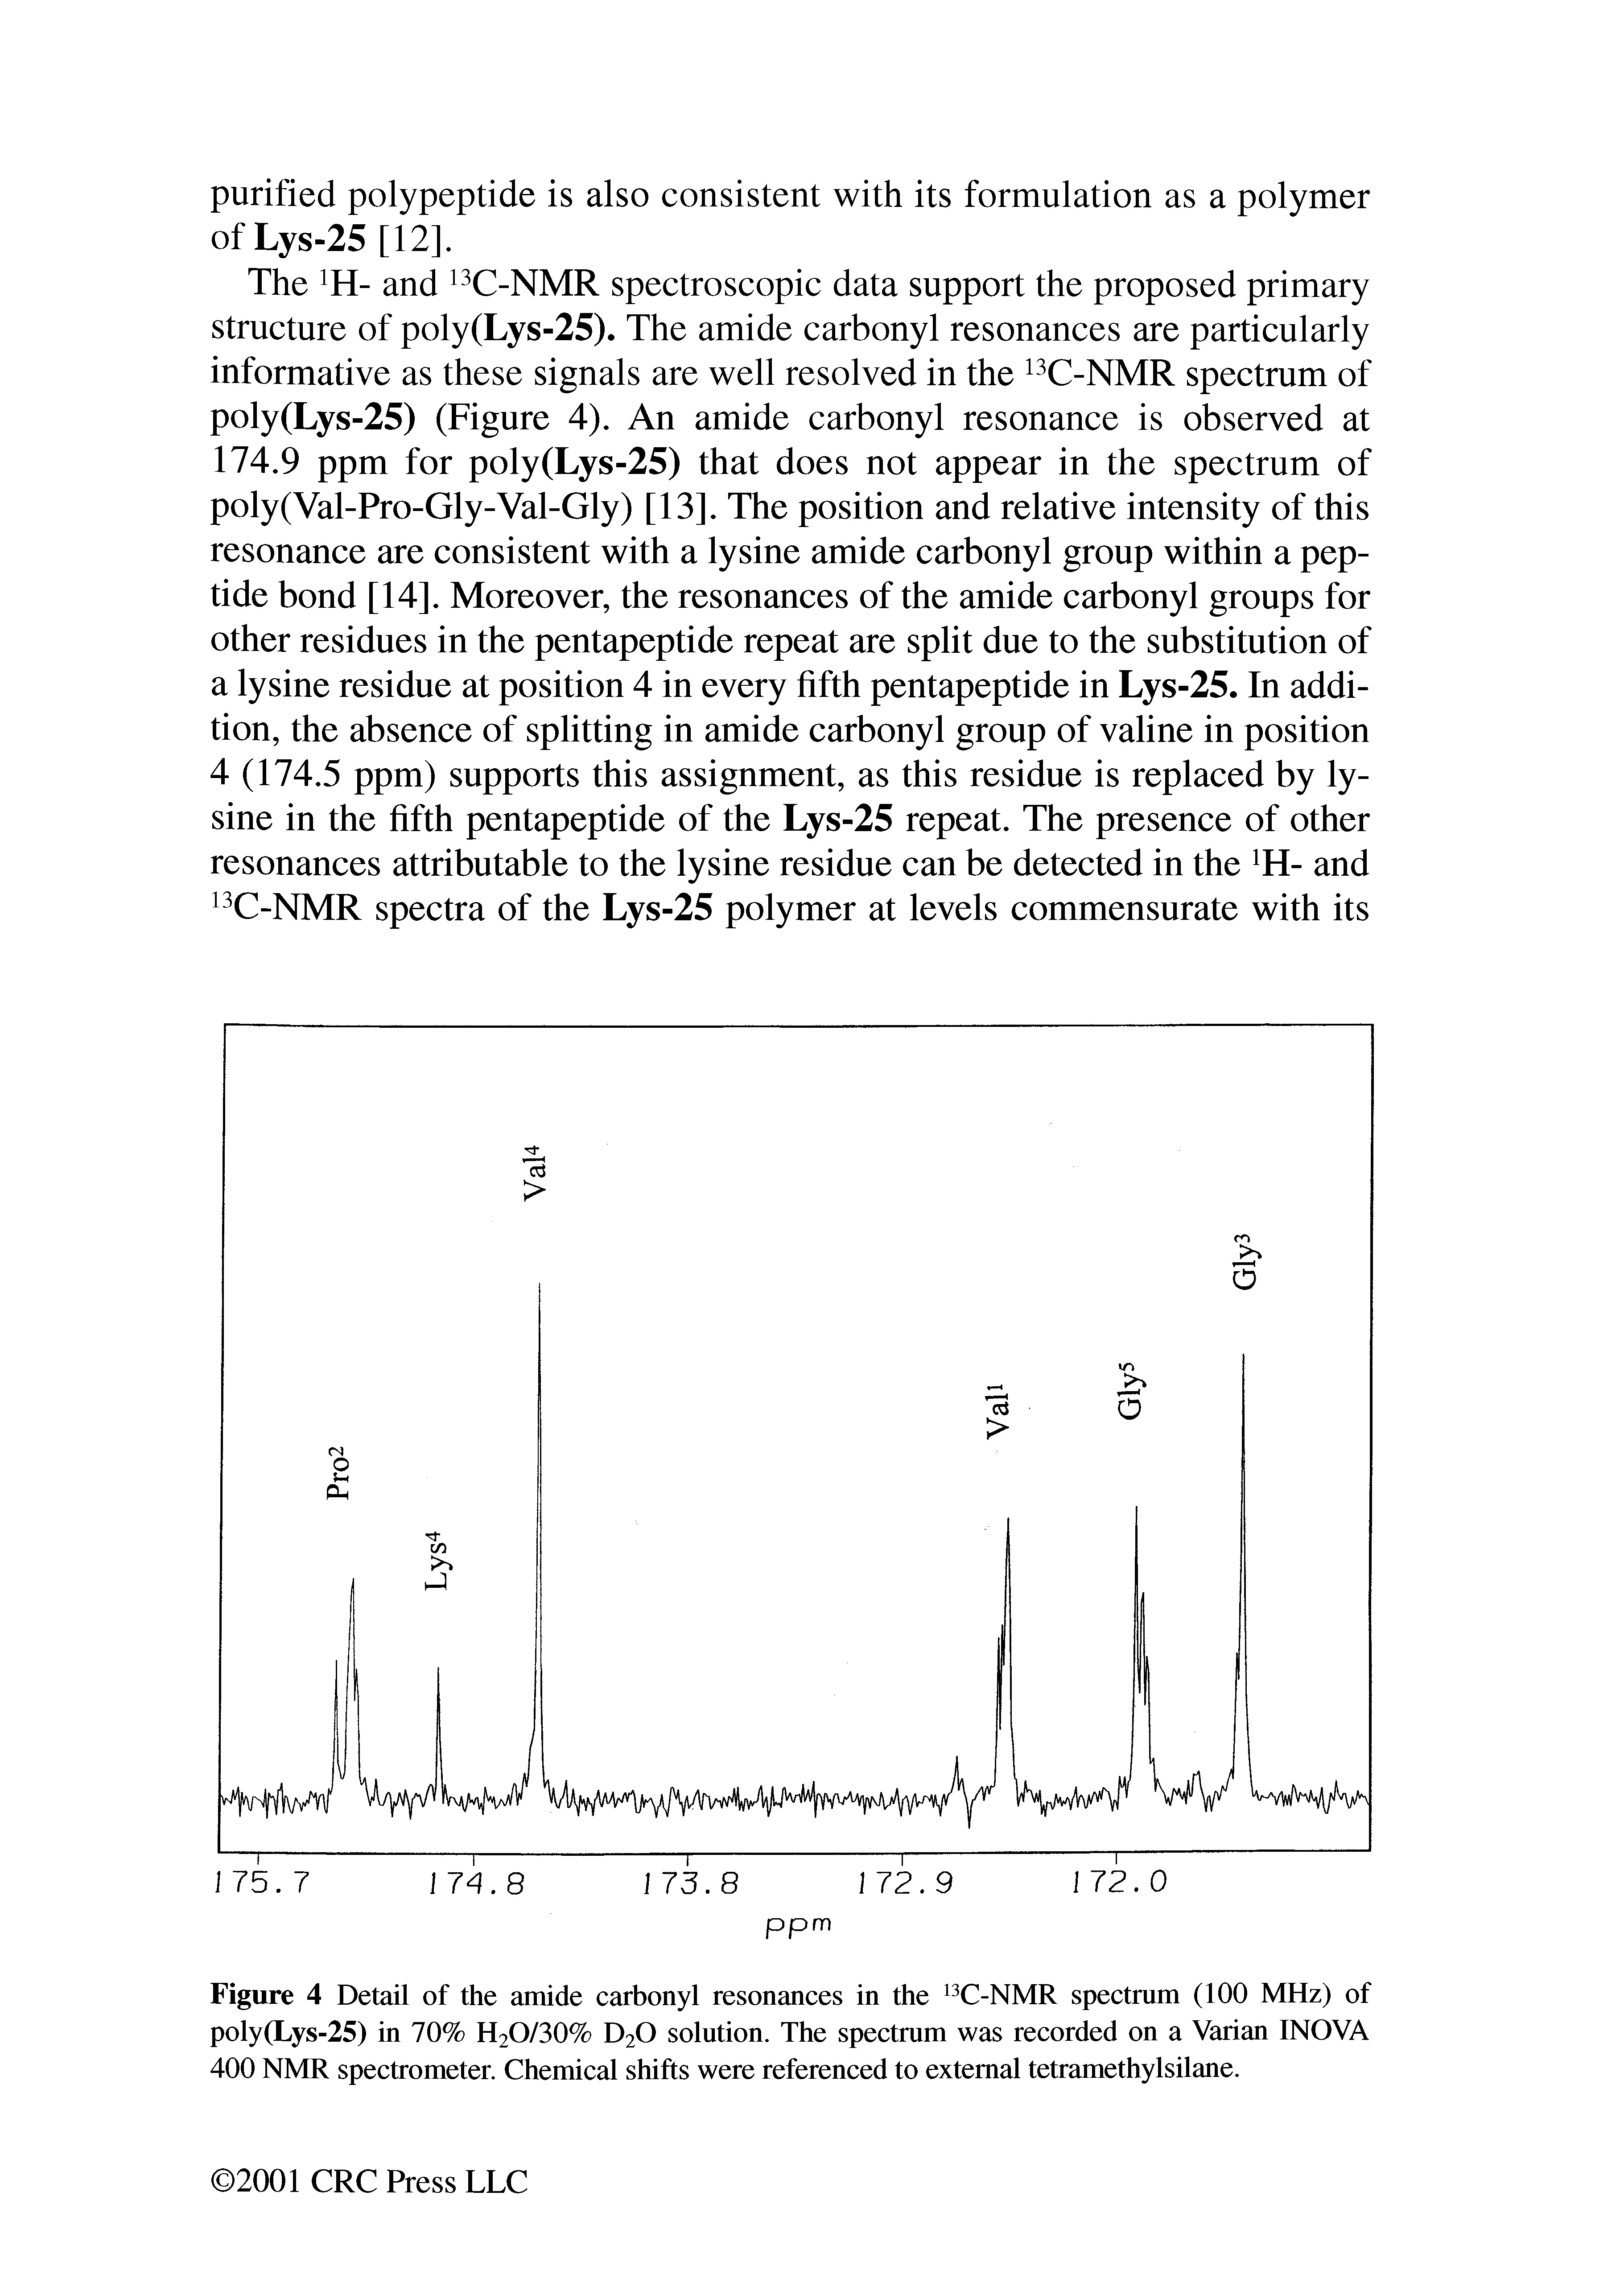 Figure 4 Detail of the amide carbonyl resonances in the C-NMR spectrum (100 MHz) of poly (Lys-25) in 70% H2O/30% D2O solution. The spectrum was recorded on a Varian INOVA 400 NMR spectrometer. Chemical shifts were referenced to external tetramethylsilane.